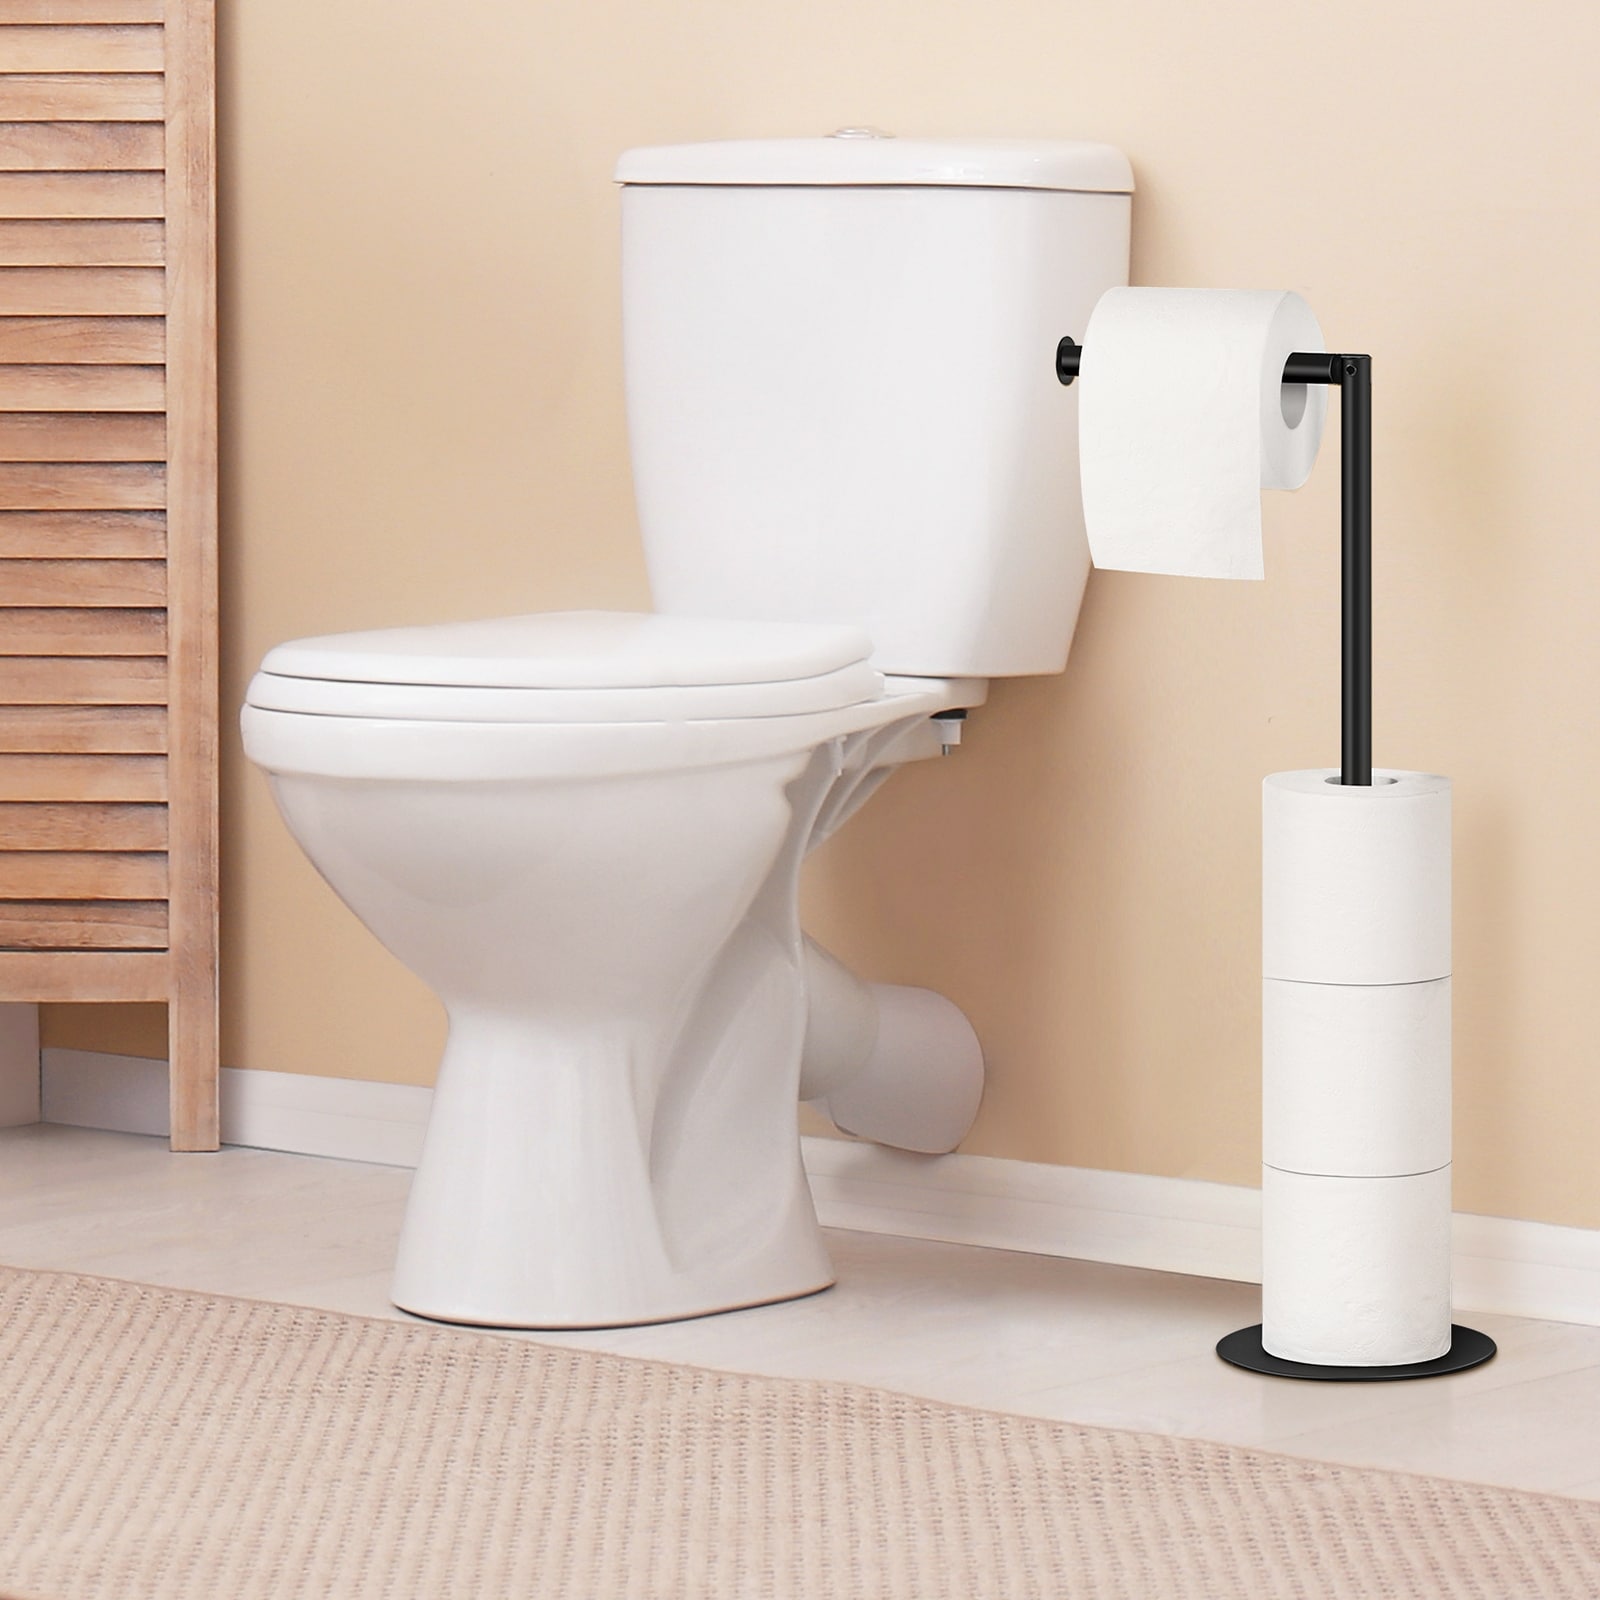 https://ak1.ostkcdn.com/images/products/is/images/direct/6f0a1eba47621a423082771beea32bbed344caac/Free-Standing-Toilet-Paper-Holder-for-Bathroom.jpg